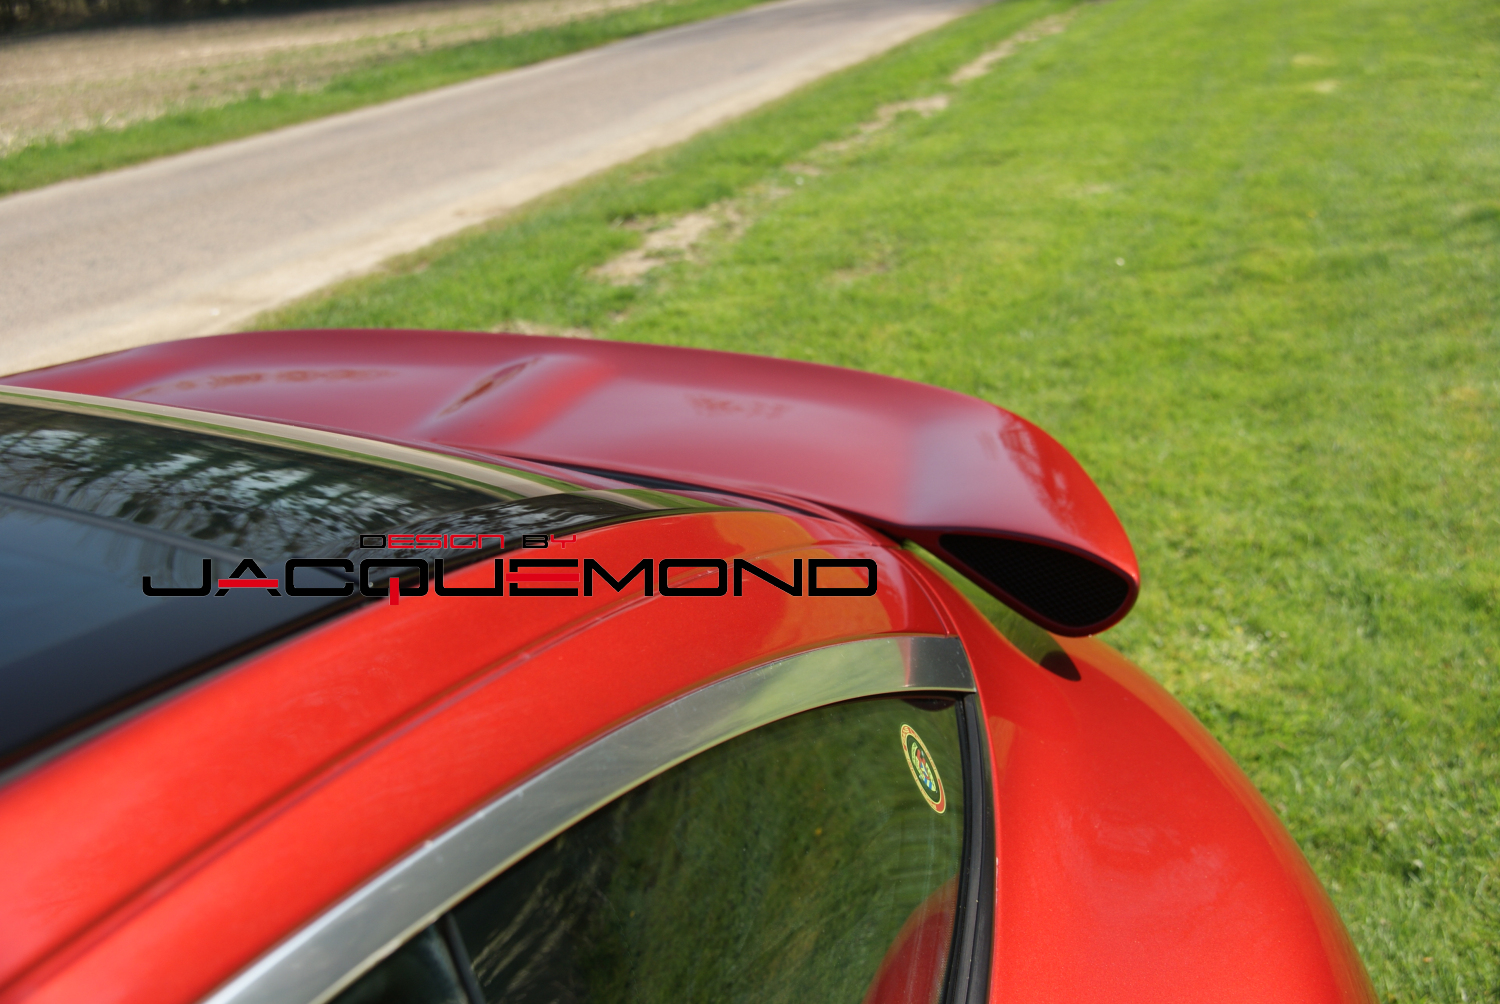 Darus rear wing for Porsche 997 by Jacquemond.